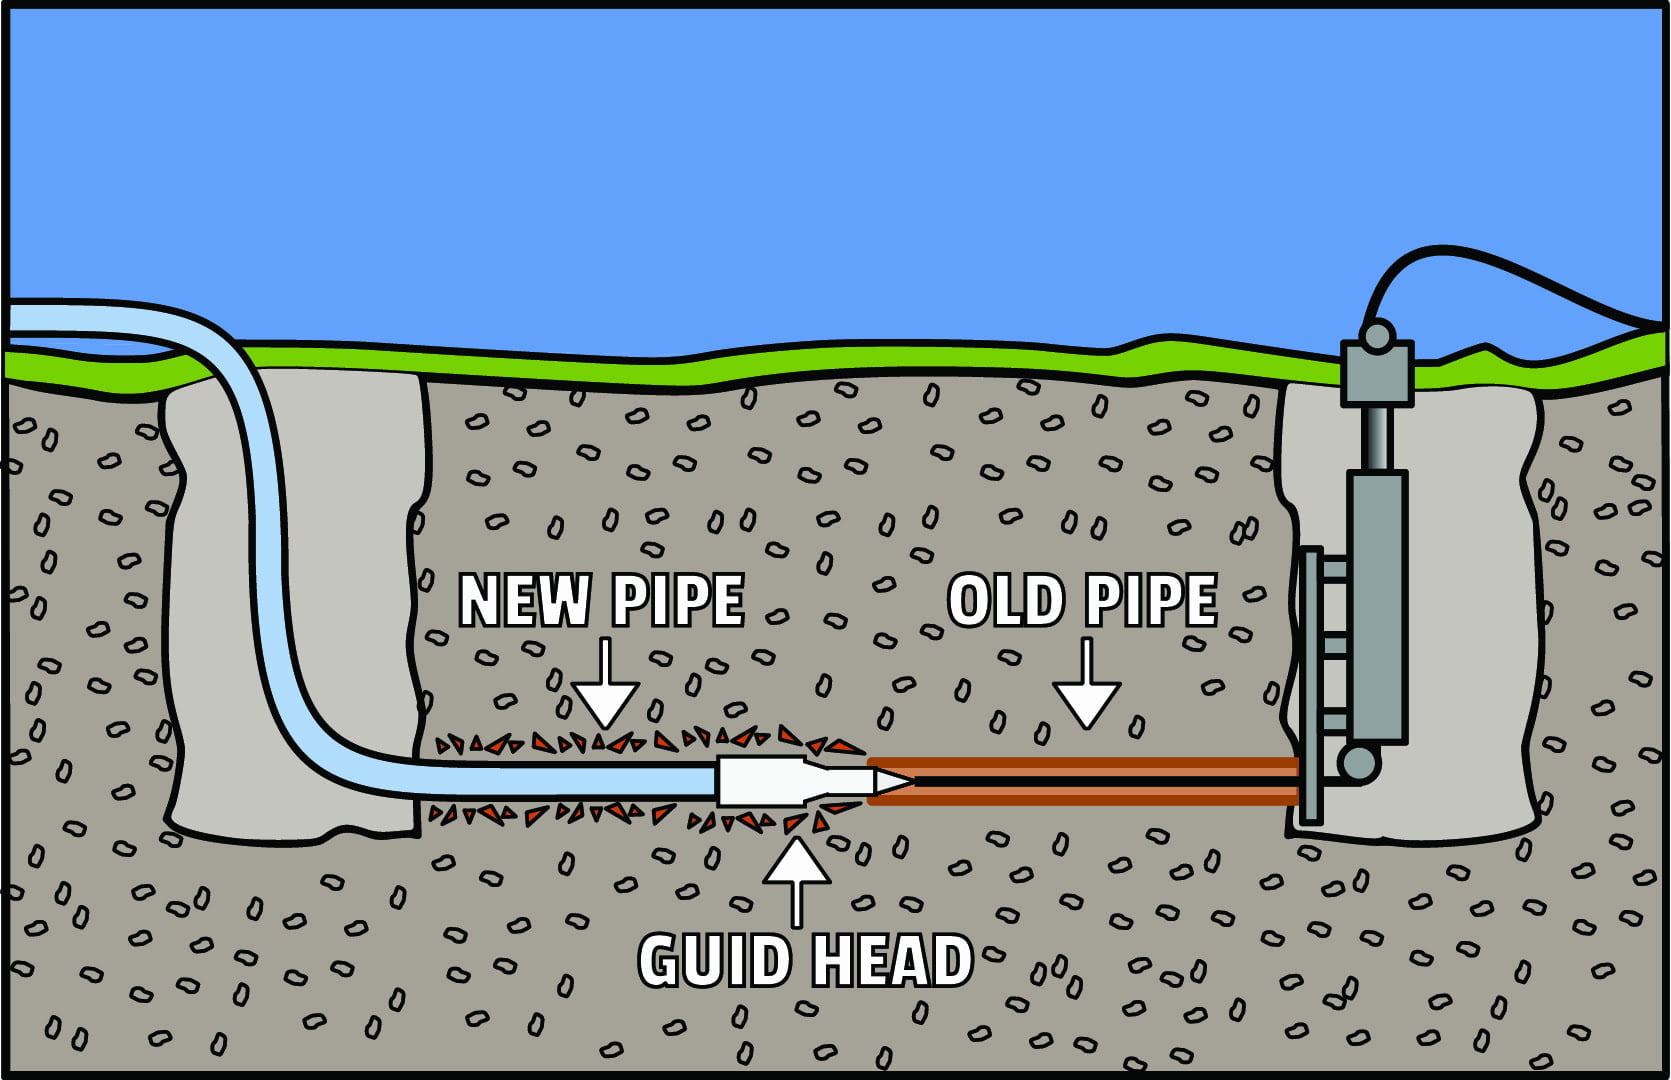 Burst Pipe Repairs - Graphic Explaining The Water Piping System